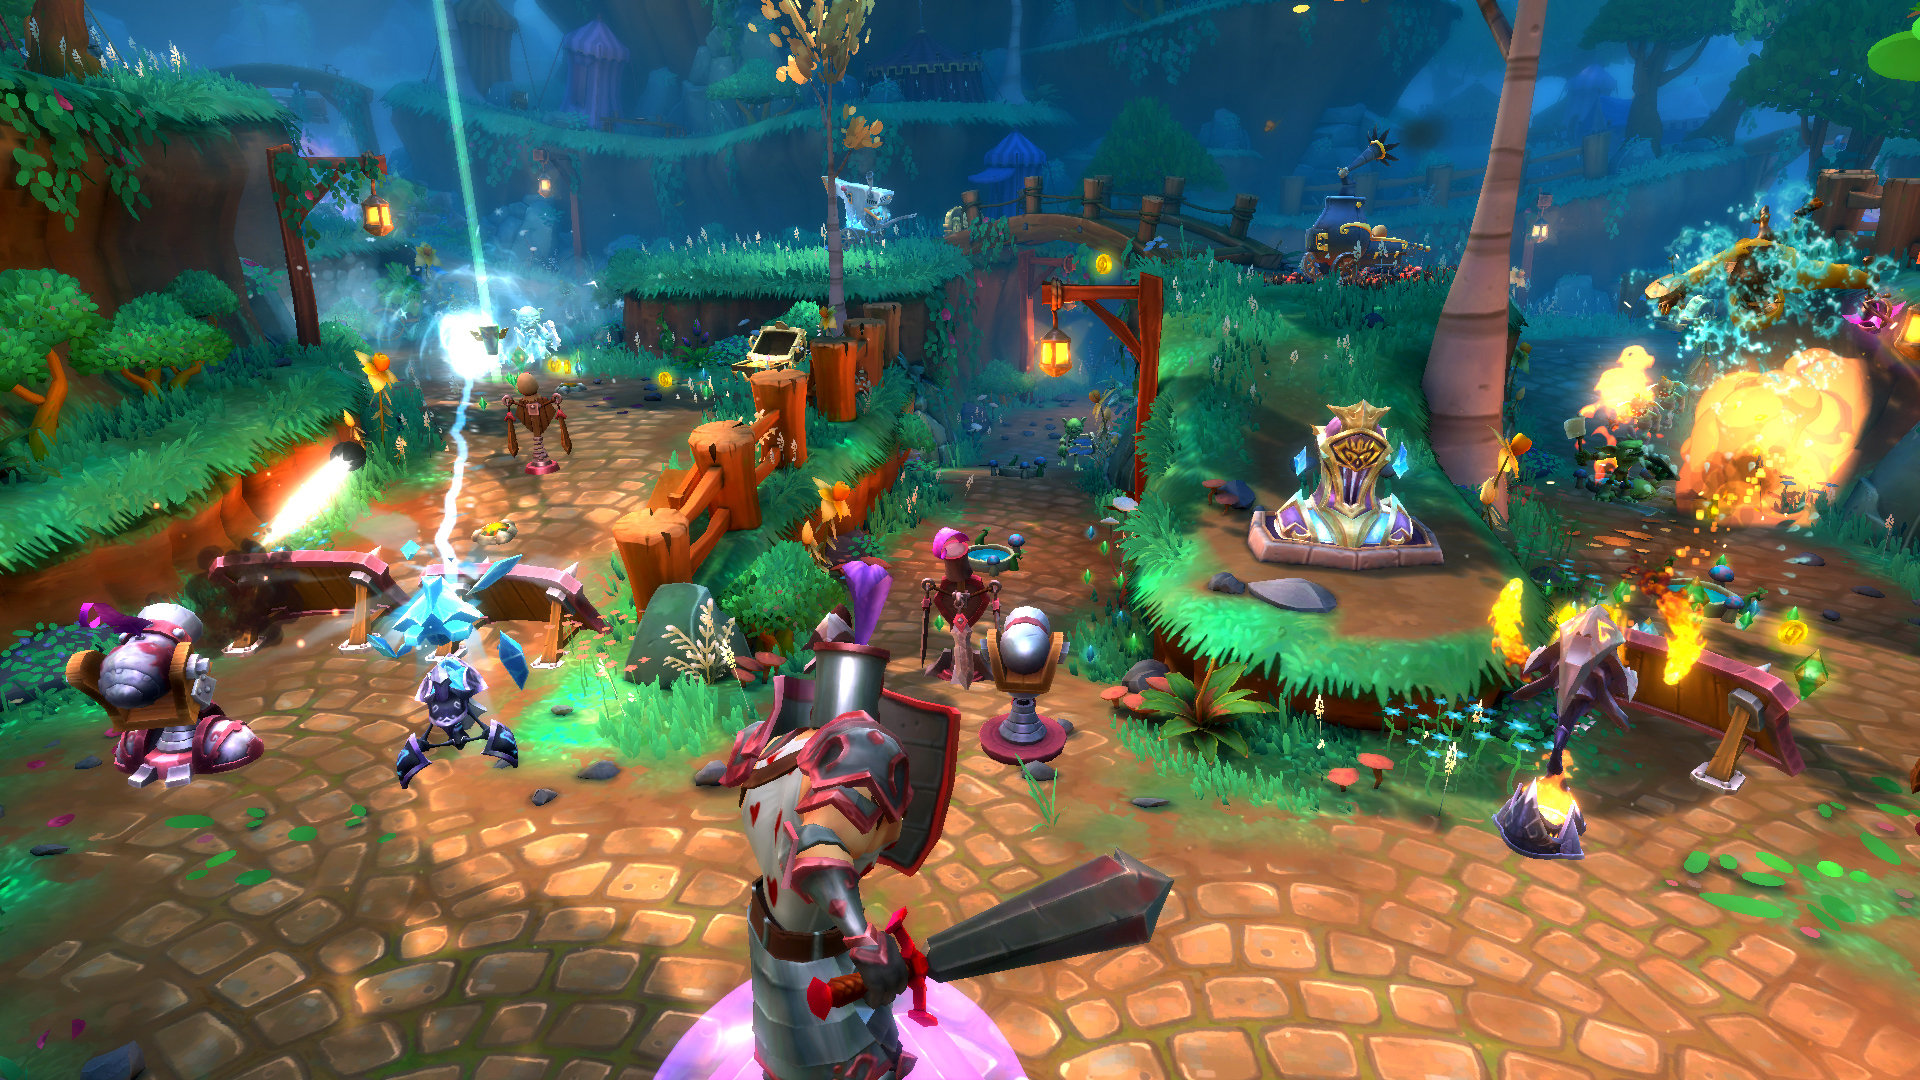 Dungeon Defenders Ii Game Ps4 Playstation